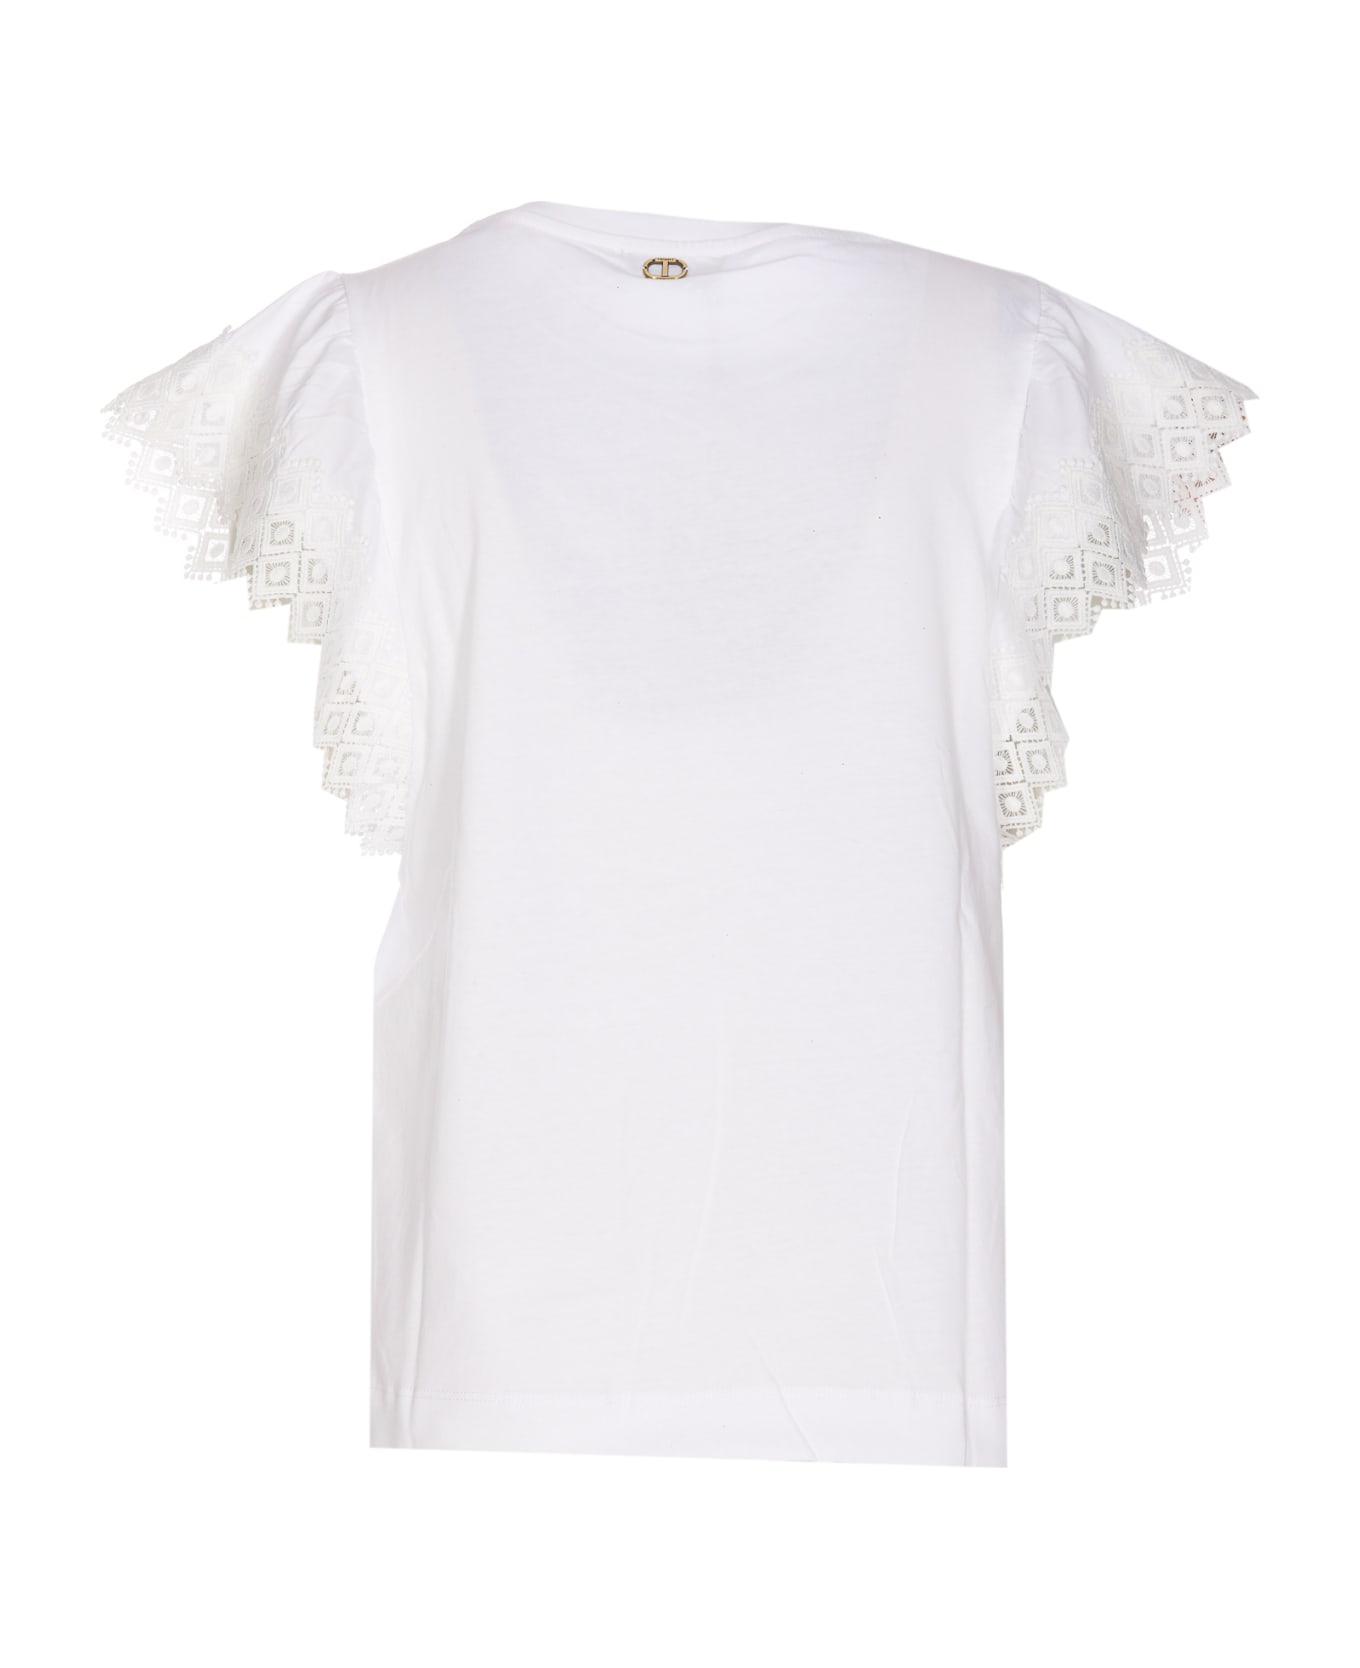 TwinSet T-shirt With Macrame' Sleeves TwinSet - WHITE